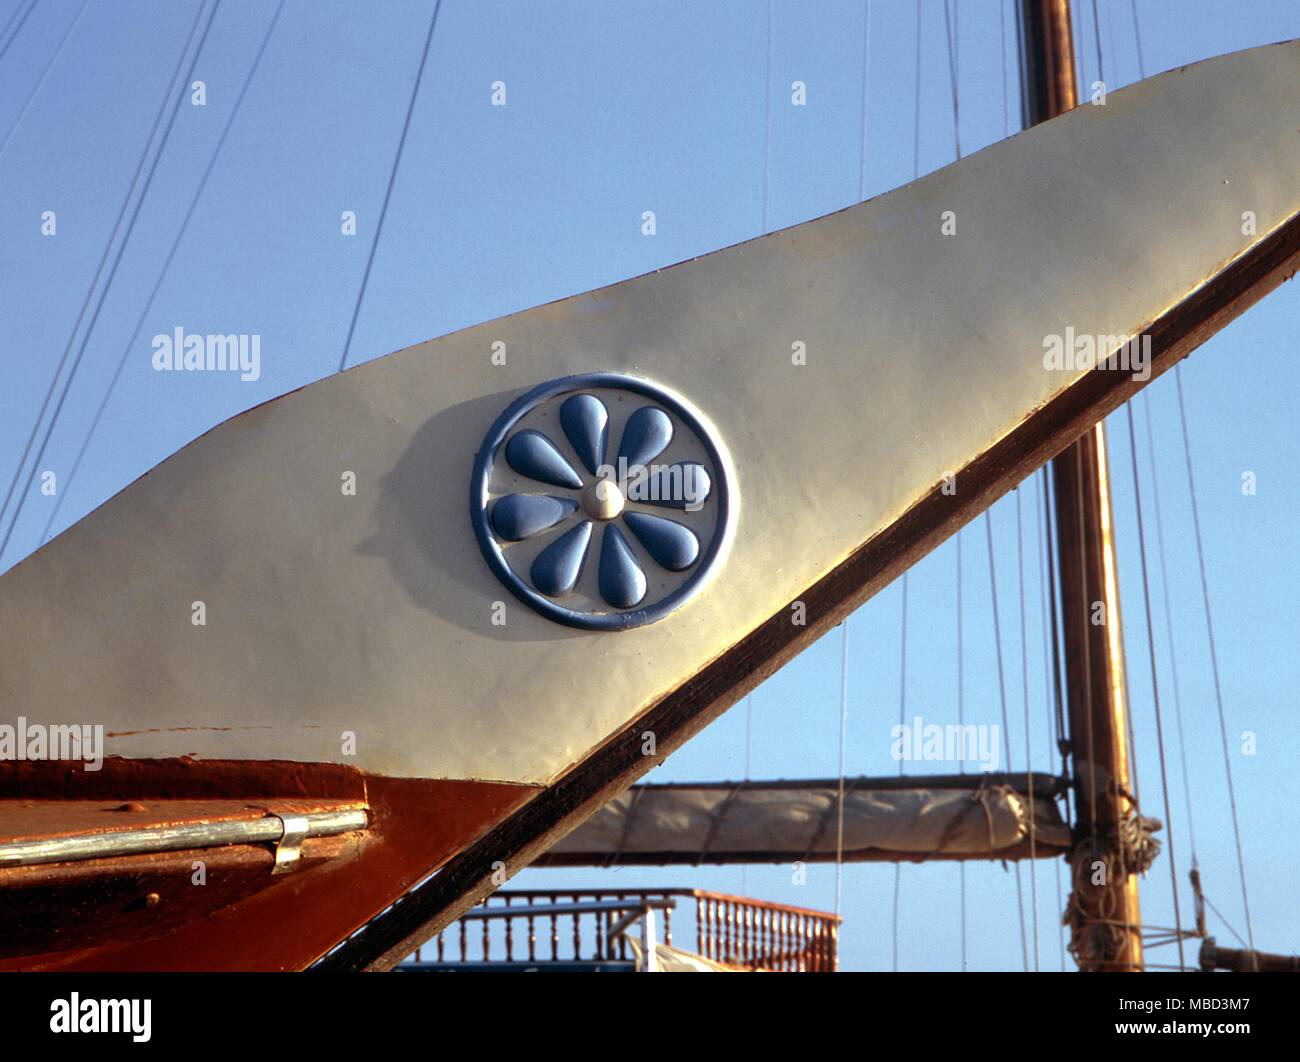 Symbols Eight rayed star on the prow of a traditional Arab dhow. Stock Photo